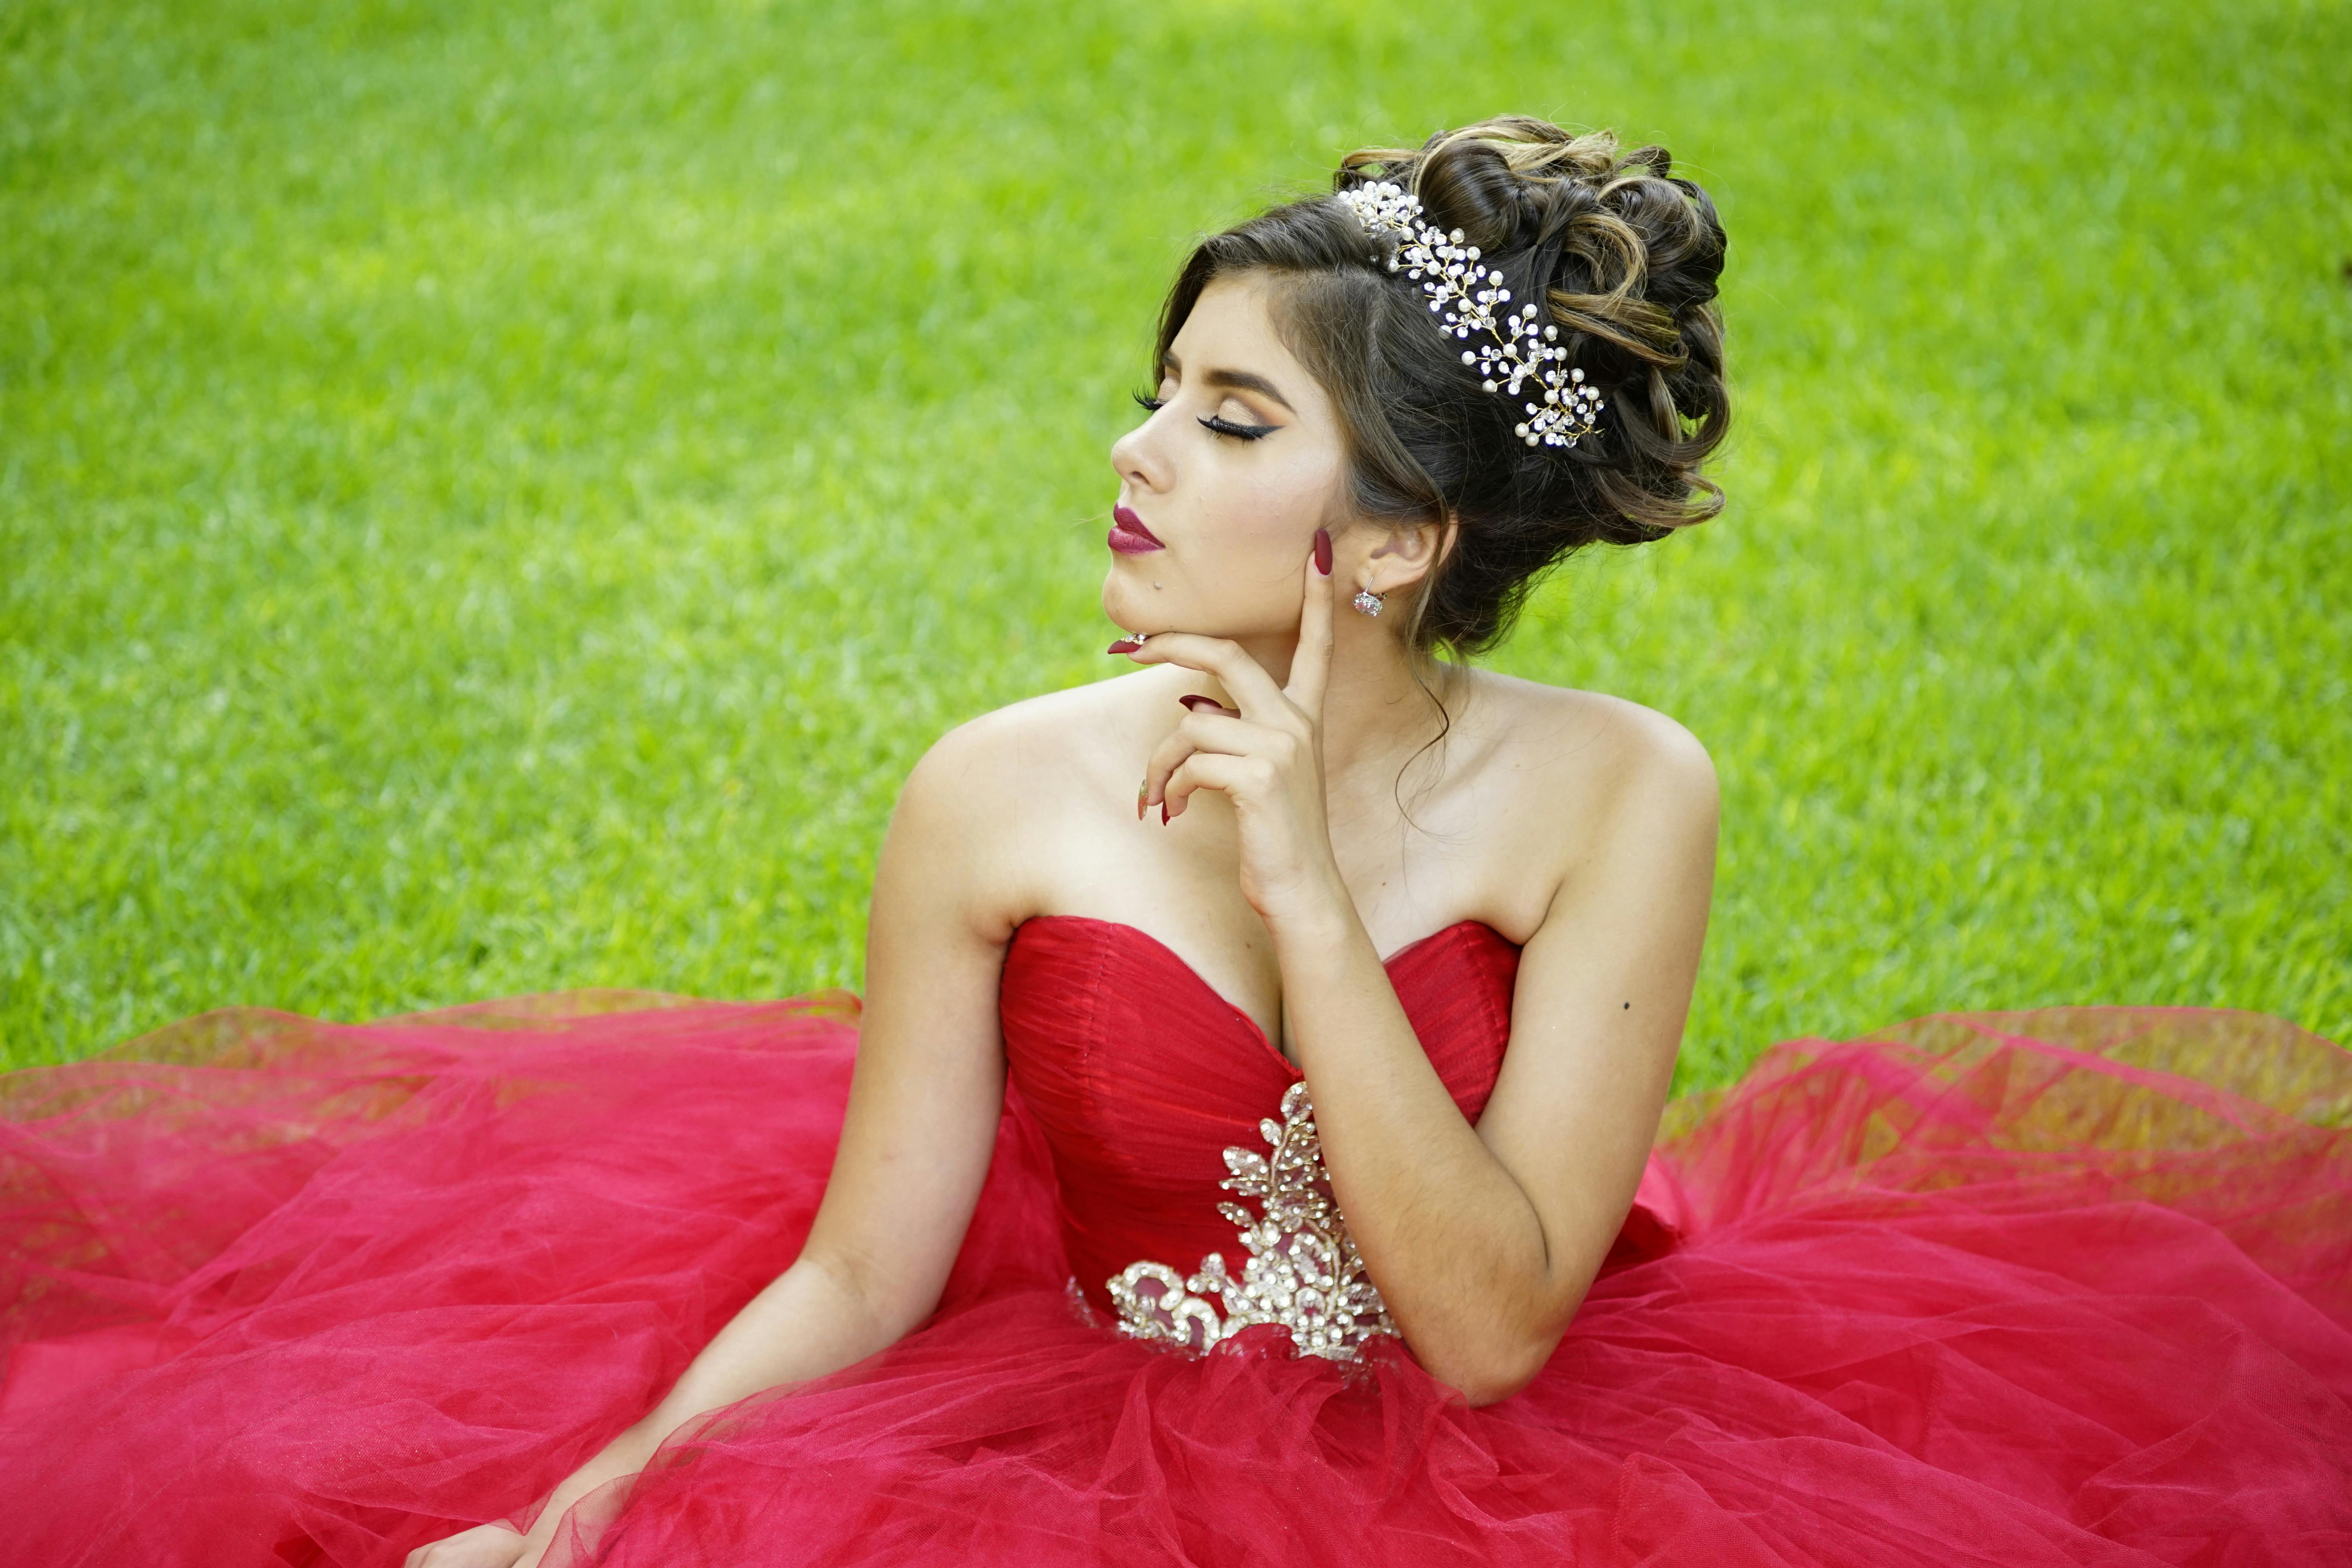 Portrait Of A Beautiful And Gentle Girl In Elegant Gown Posing Outdoor  Stock Photo - Download Image Now - iStock